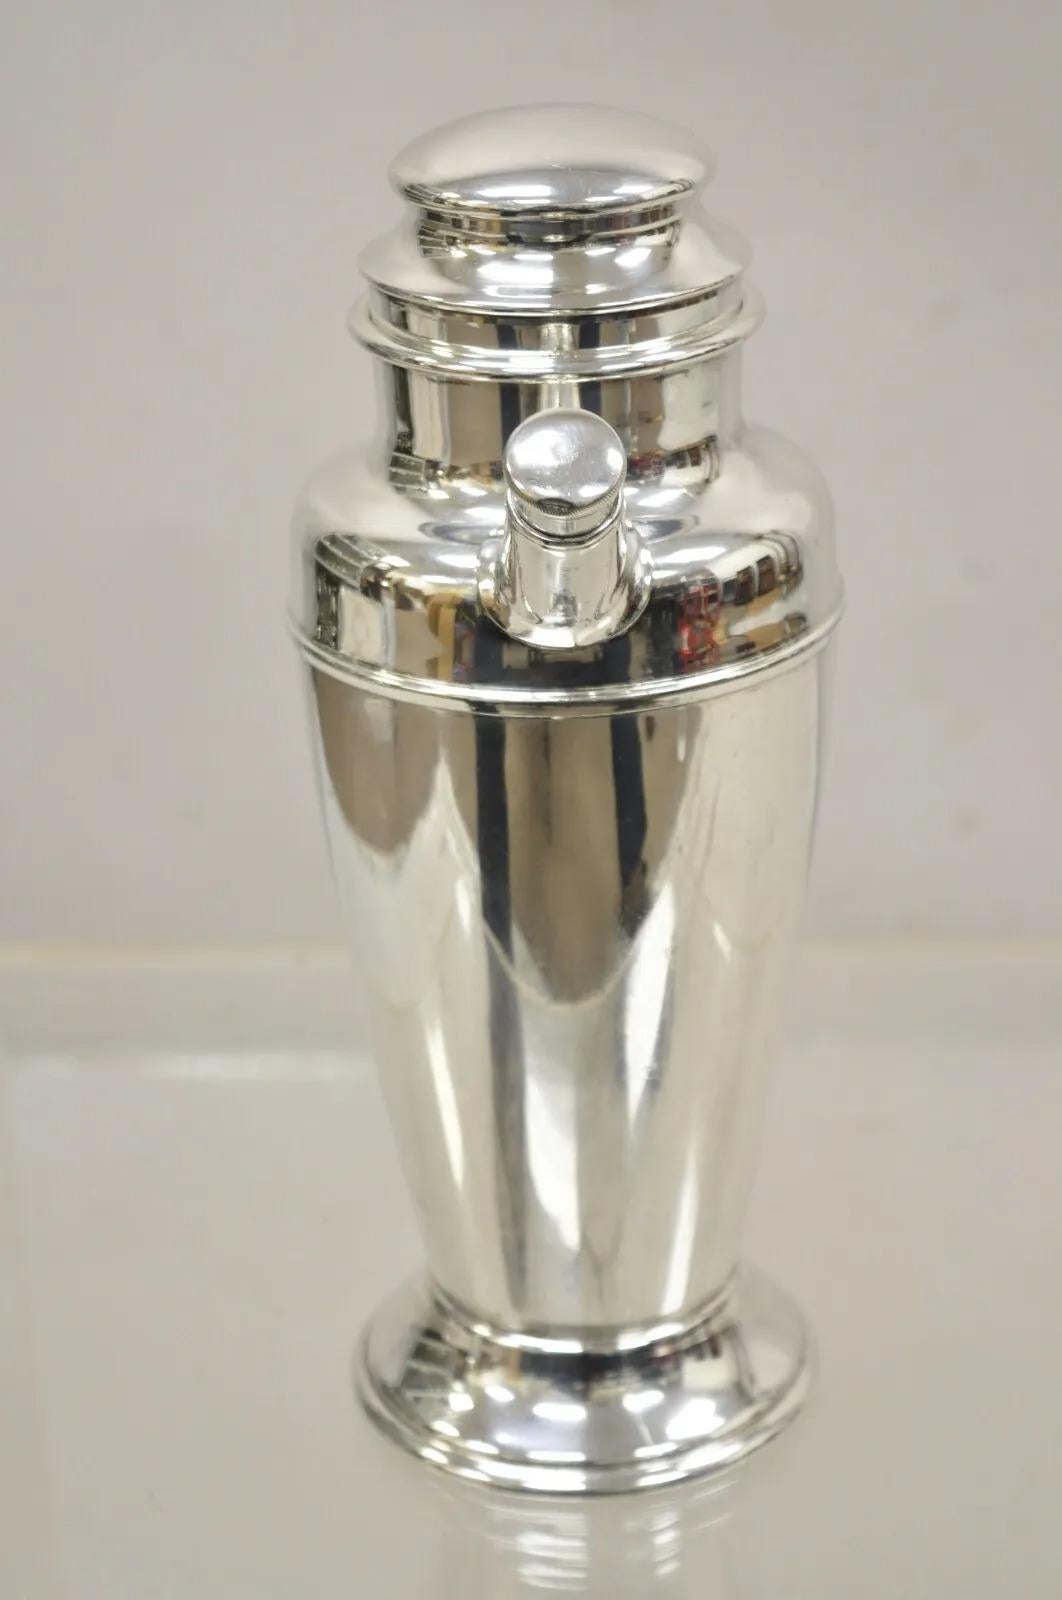 Vintage WMA Rogers 330 Silver Plated Art Deco Martini Cocktail Shaker. Circa Mid 20th Century. Measurements: 11.5